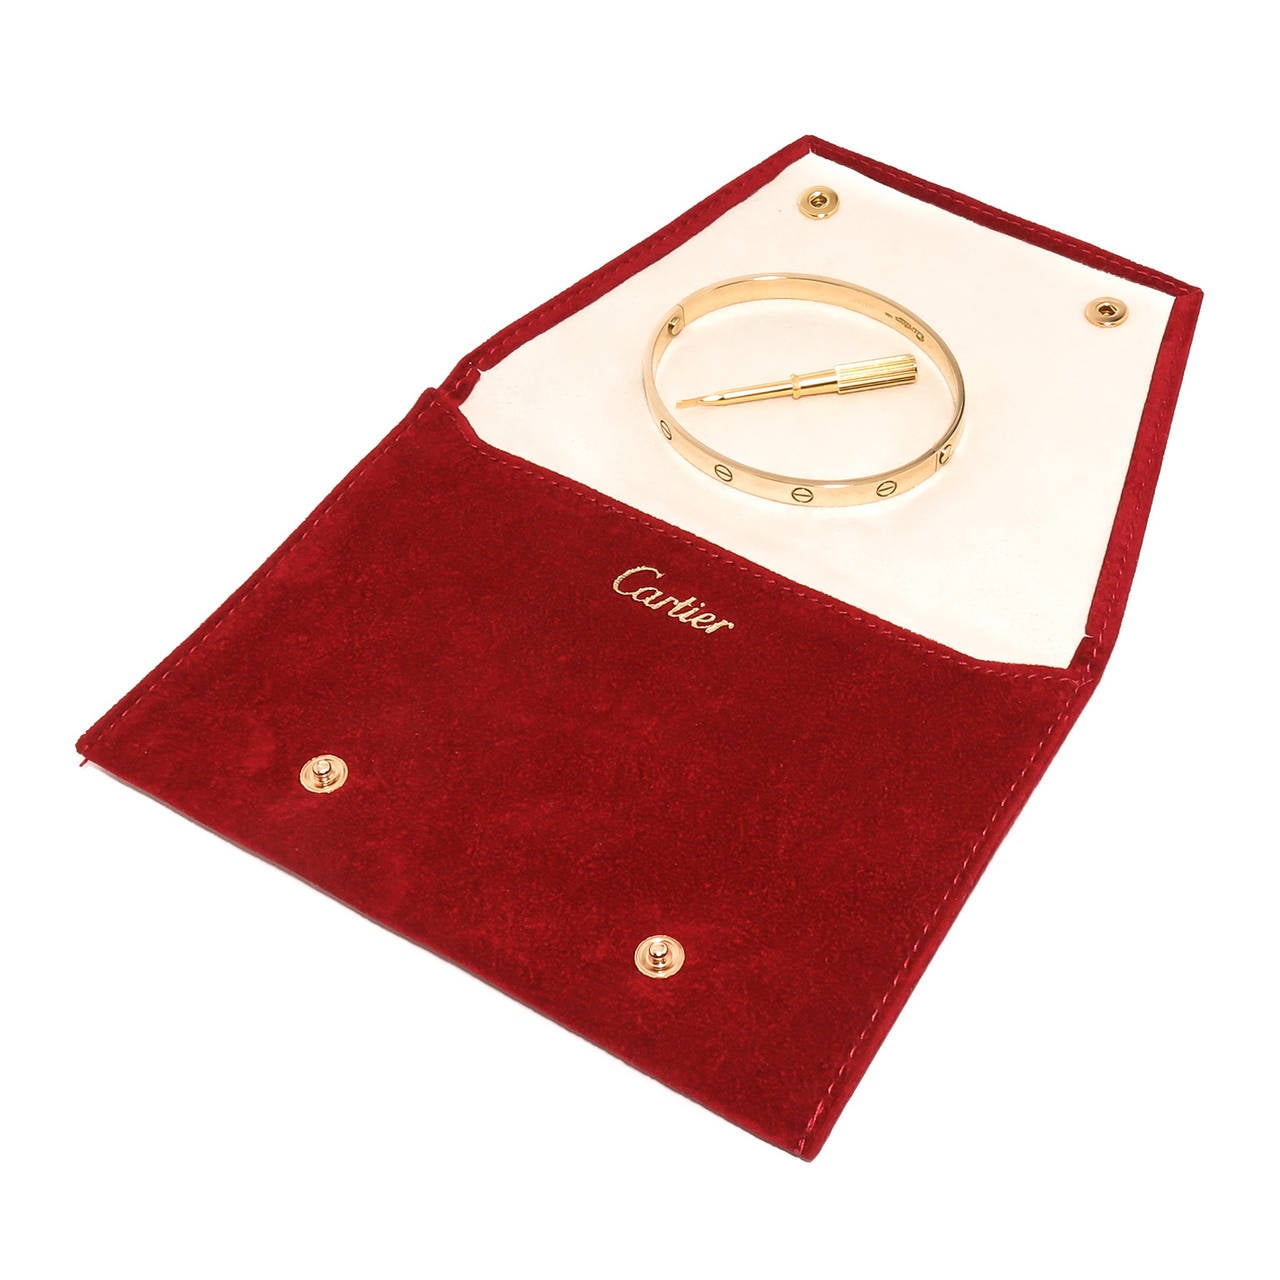 Circa 1990s Cartier 18K yellow Gold Love Bracelet. Size 20. Having original screwdriver and Cartier suede pouch. Signed and Numbered.